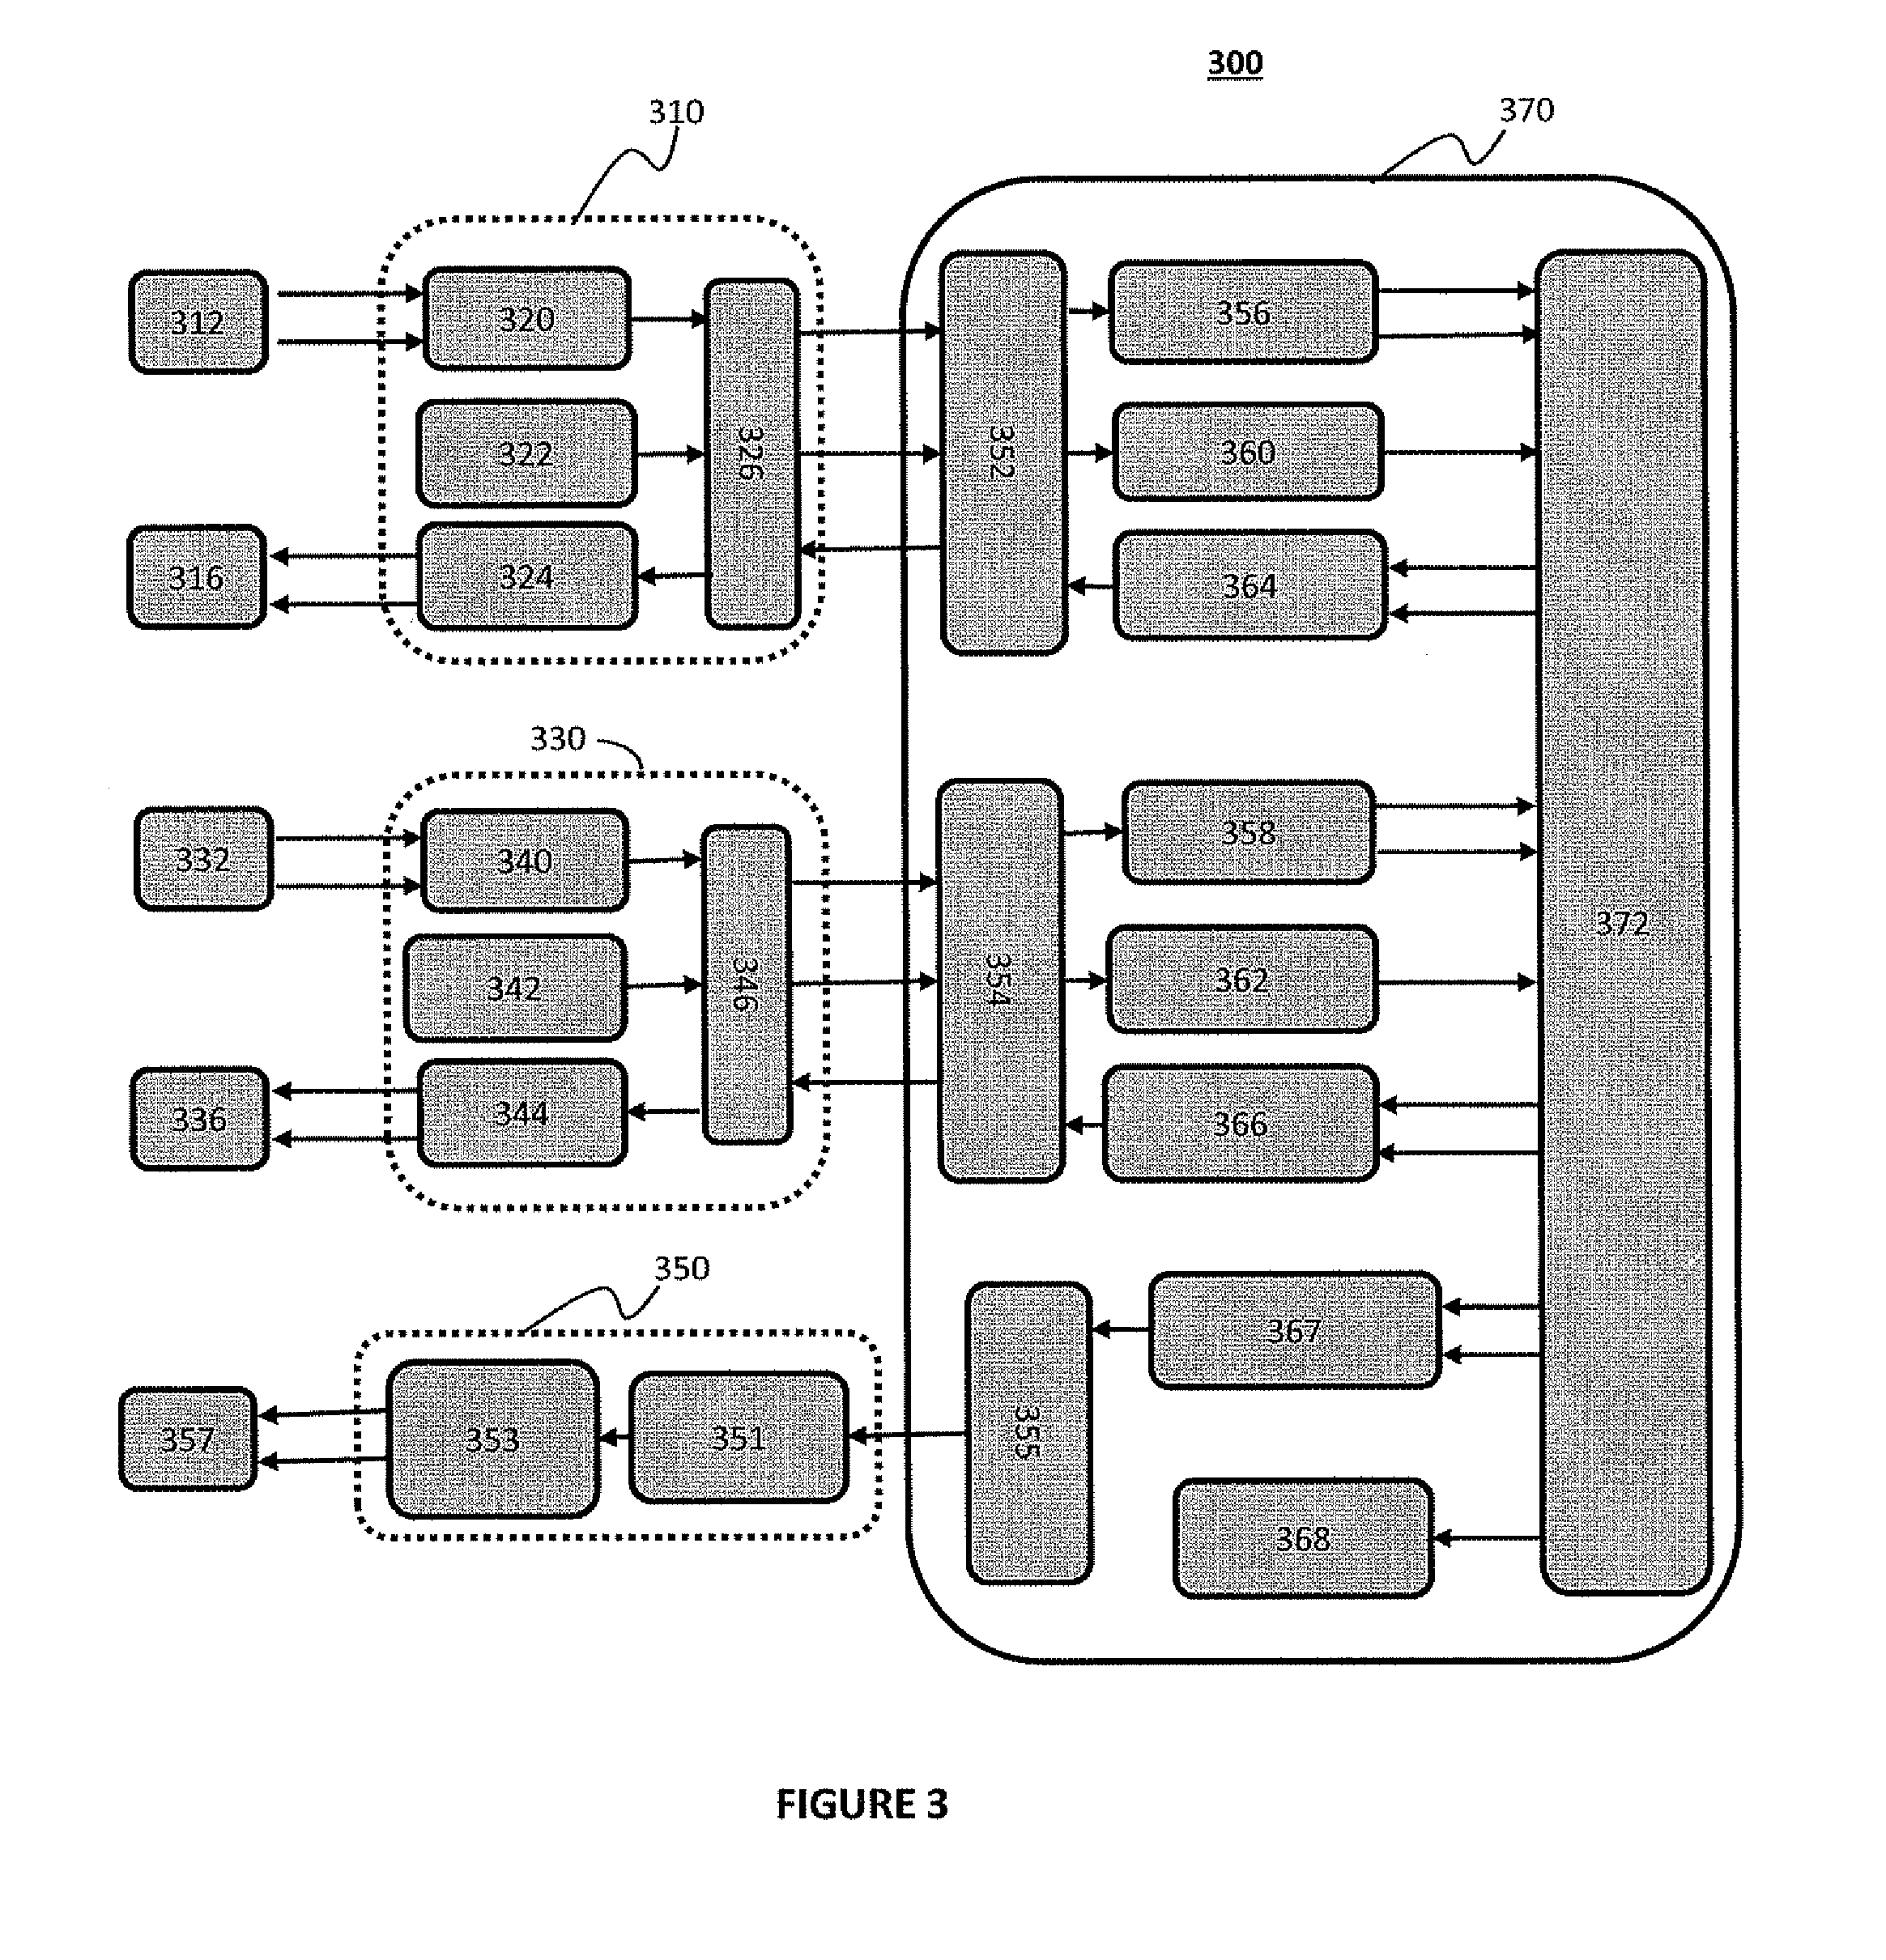 System and method for processing data signals